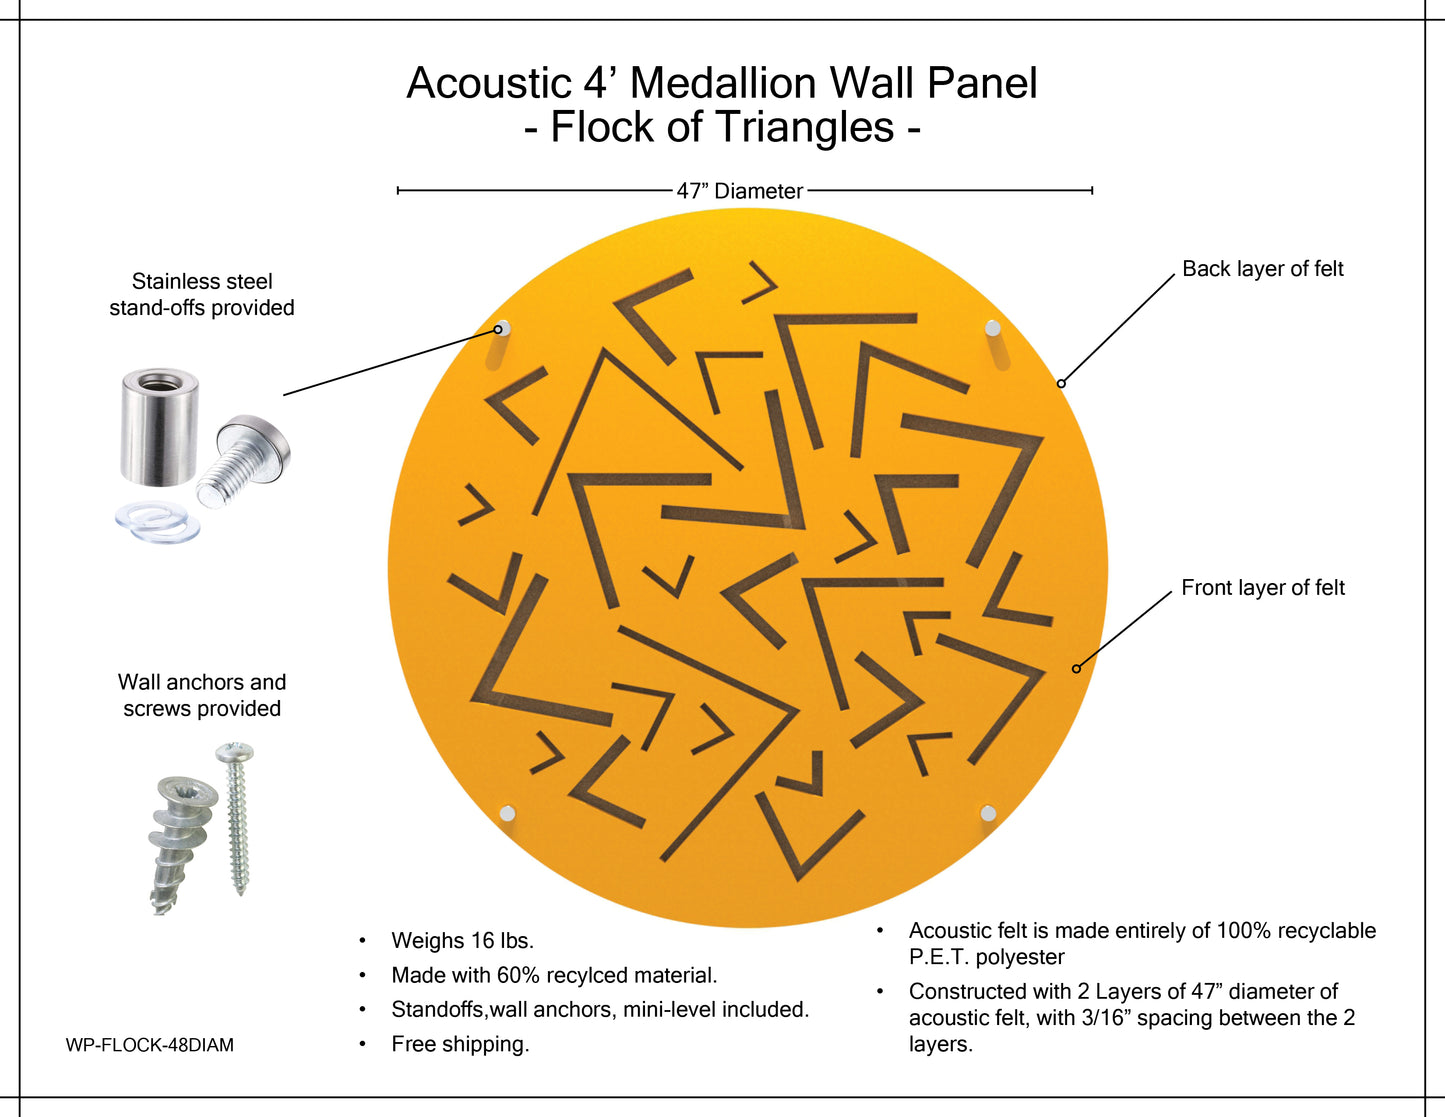 Medallion Acoustic Wall Panel - Flock of Triangles